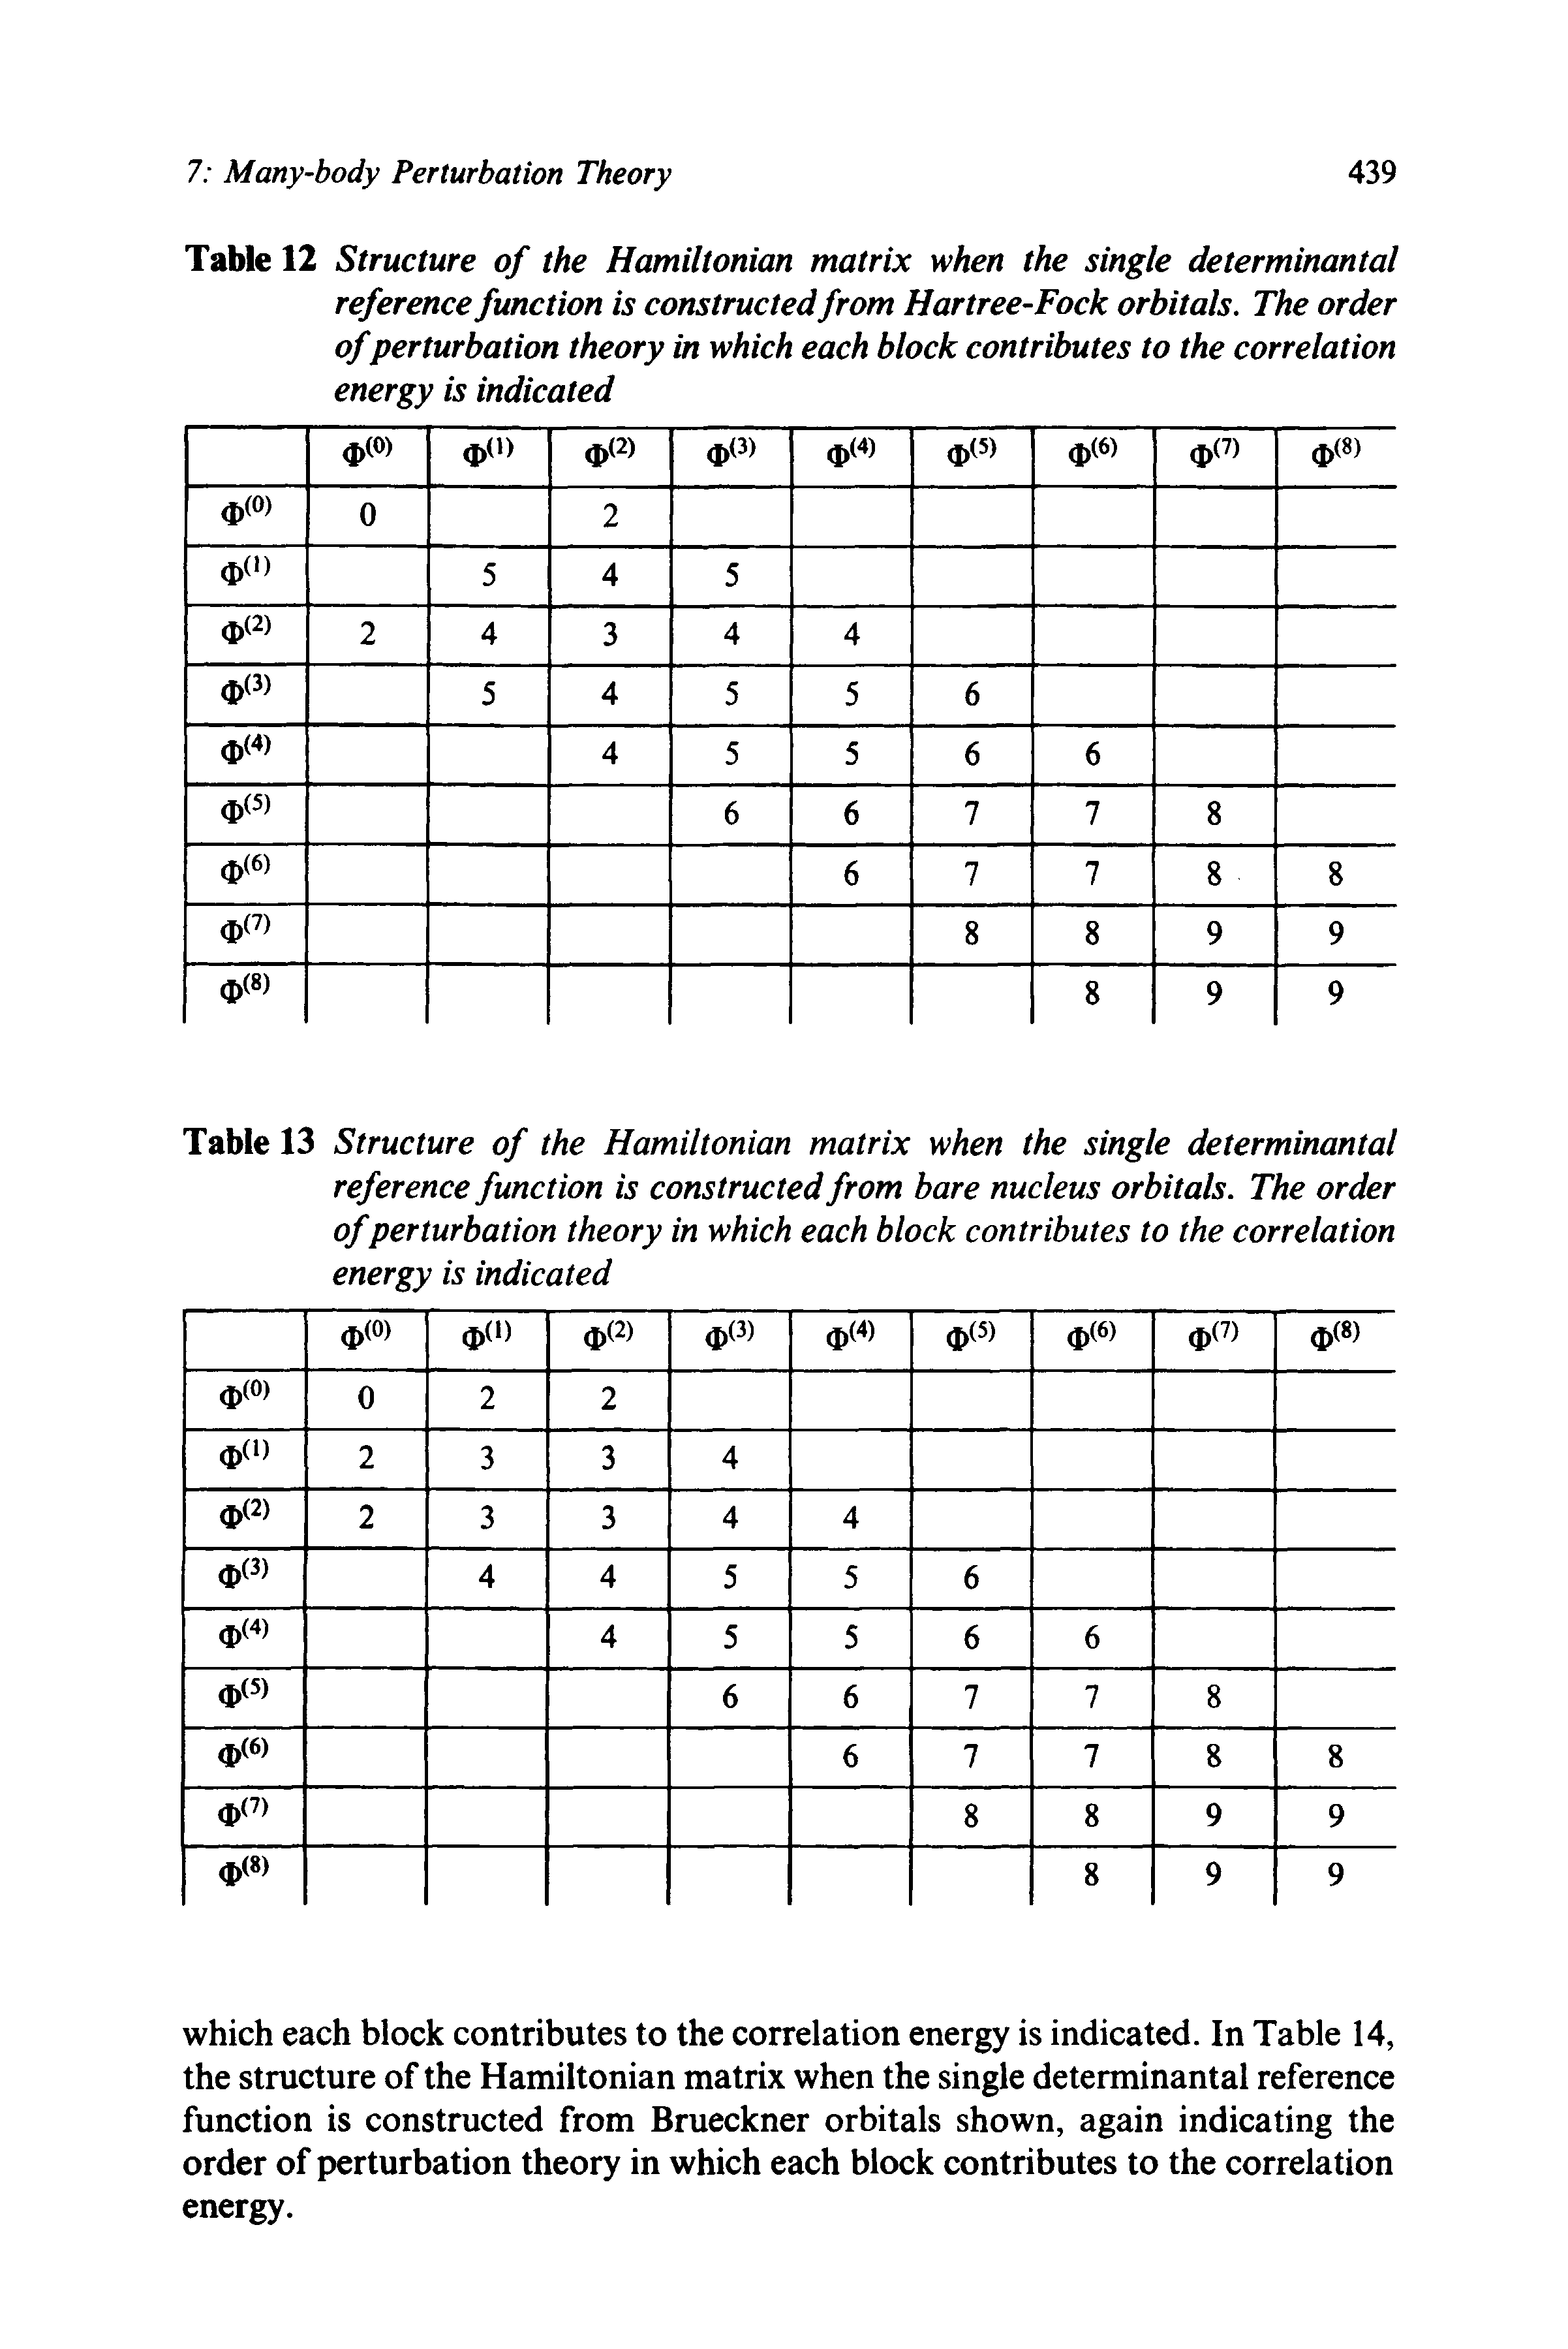 Table 12 Structure of the Hamiltonian matrix when the single determinantal reference function is constructedfrom Hartree-Fock orbitals. The order of perturbation theory in which each block contributes to the correlation energy is indicated...